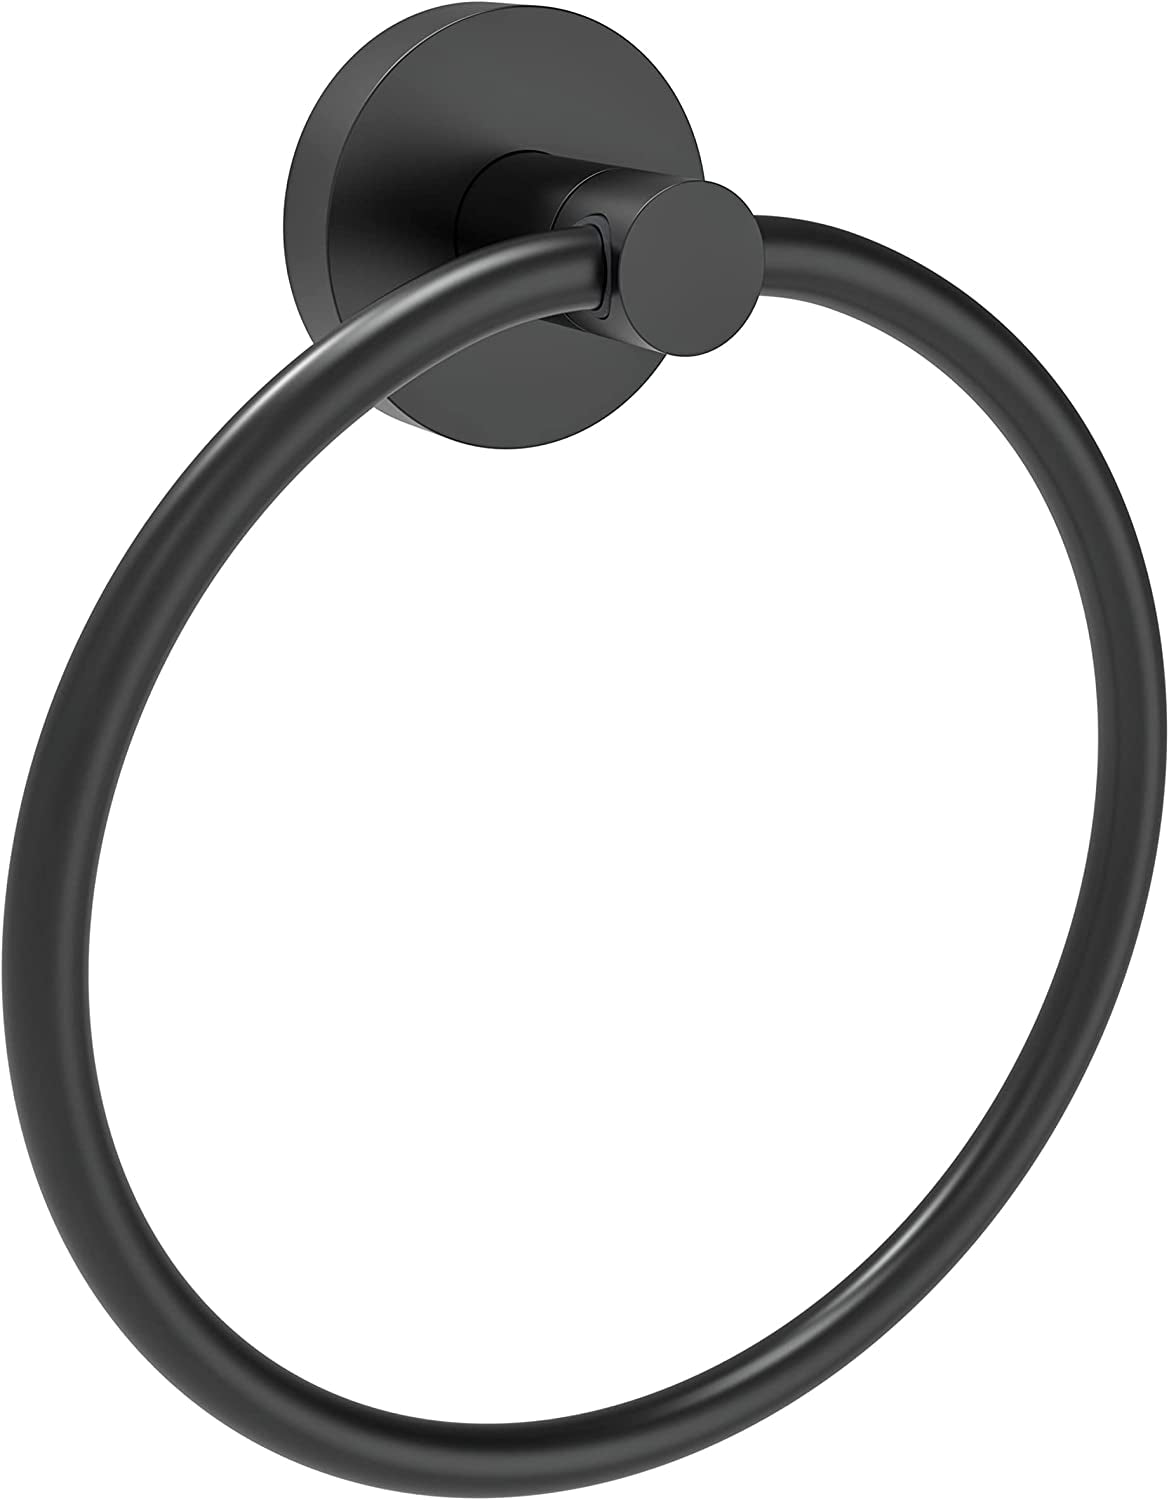 Towel Ring Hand Towel Ring Towel Ring Holder Matte Black Zinc Alloy and Stainless Steel 1Pc Simple round for Kitchen and Bathroom Wall Mount Towel Racks Heavy Duty Storage